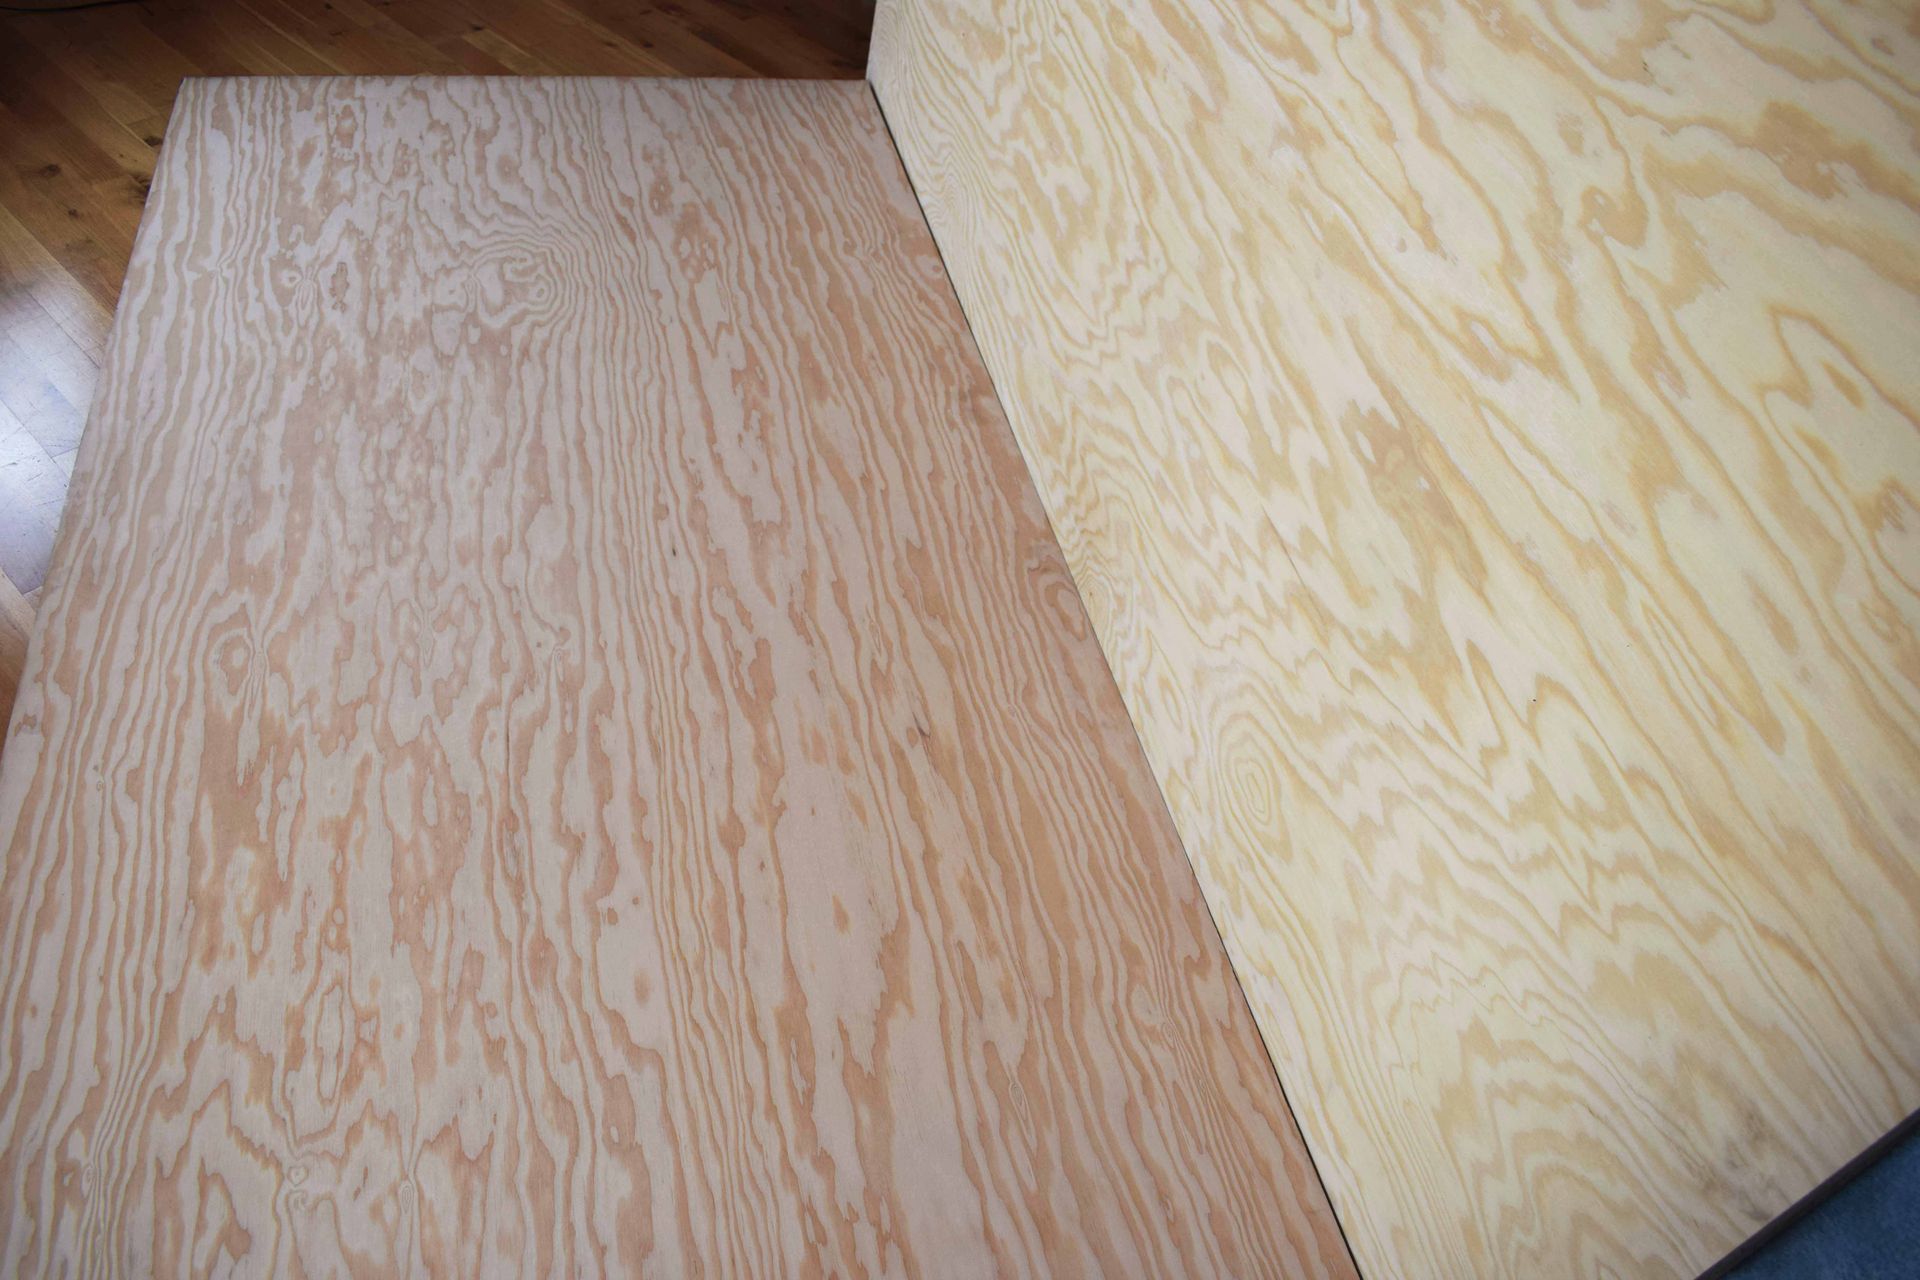 Compare Douglas Fir and Pine Plywood